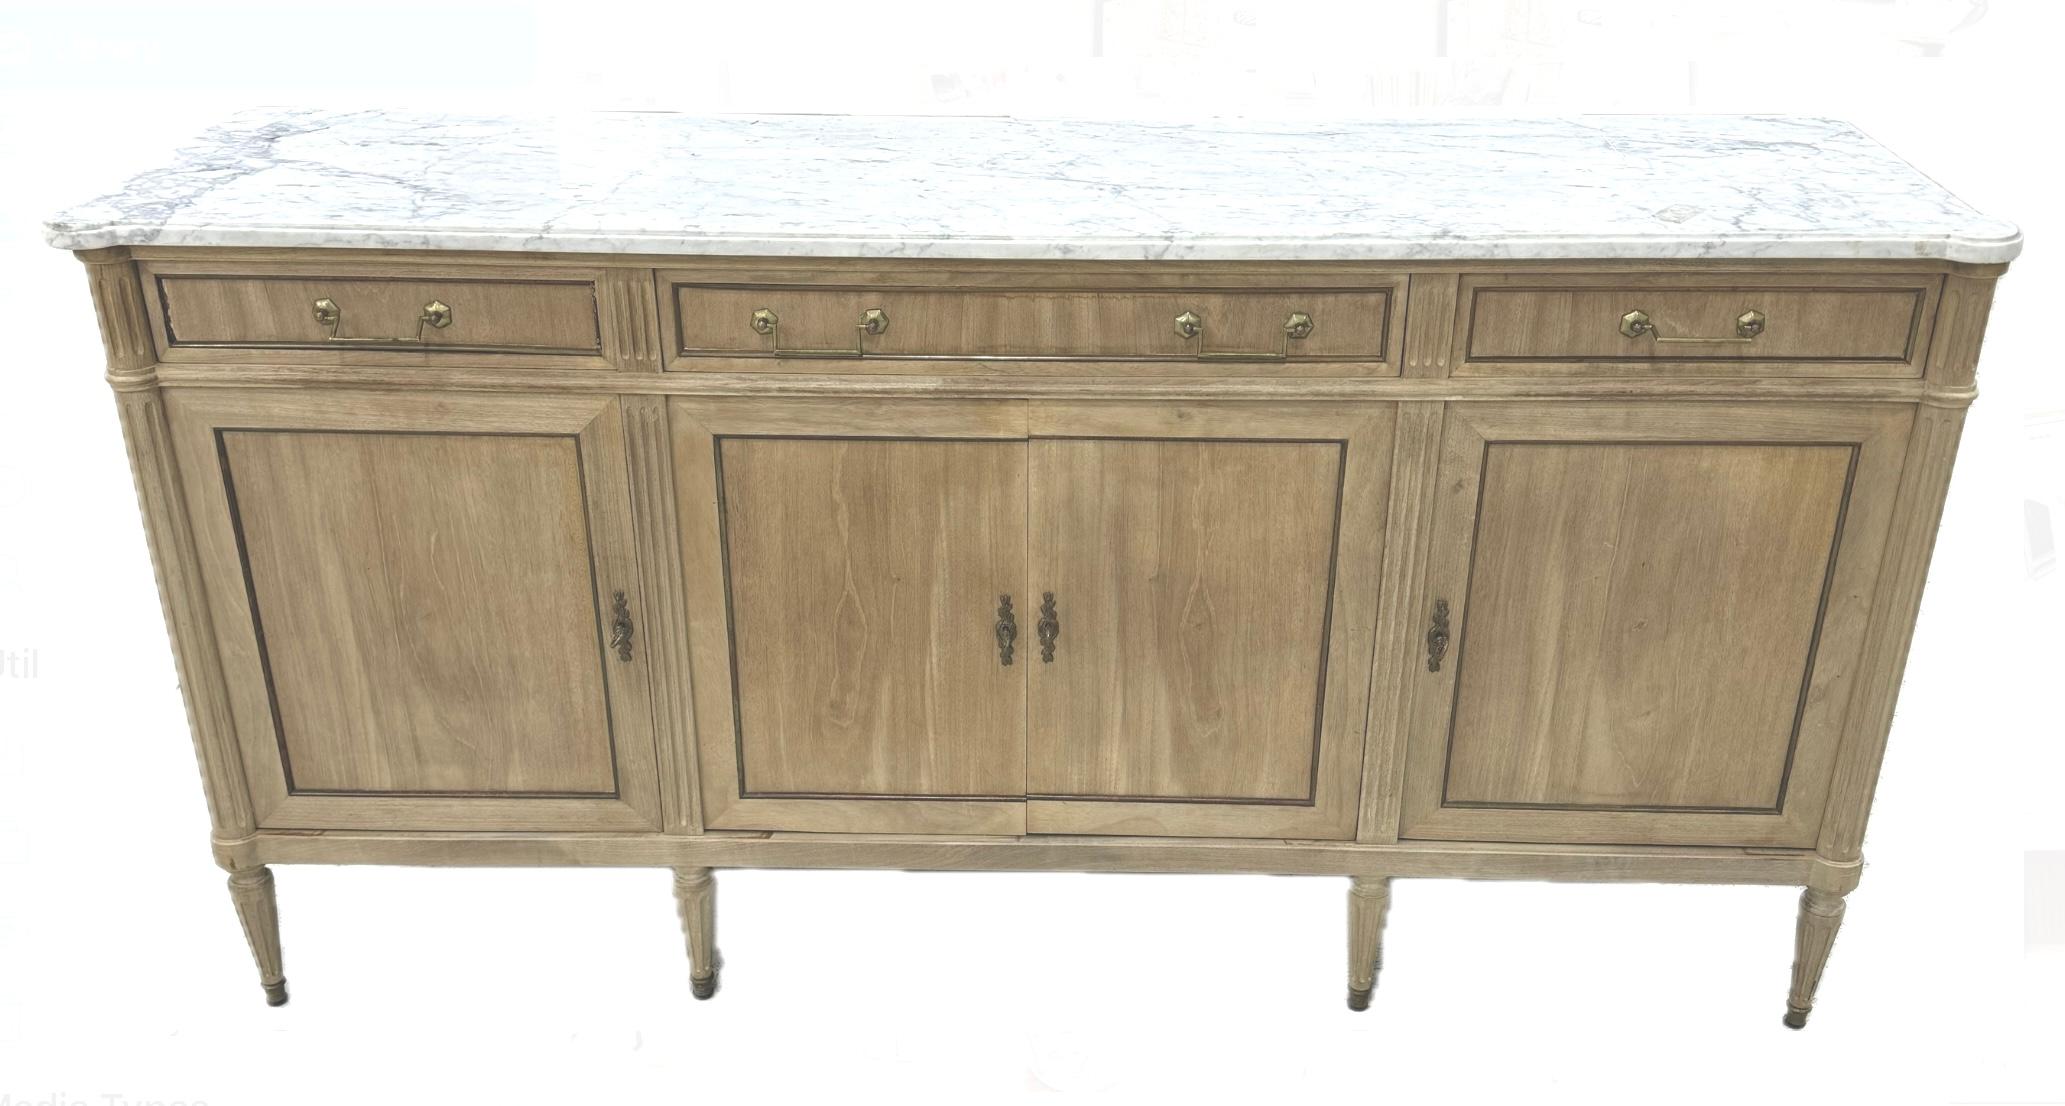 Fabolous French Louis XVI style enfilade or sideboard. Features a marble top above three upper drawers, over four doors leading to interior storage. Sideboard also features bronze hardware and rises on fluted tapered legs. Wonderful bleached